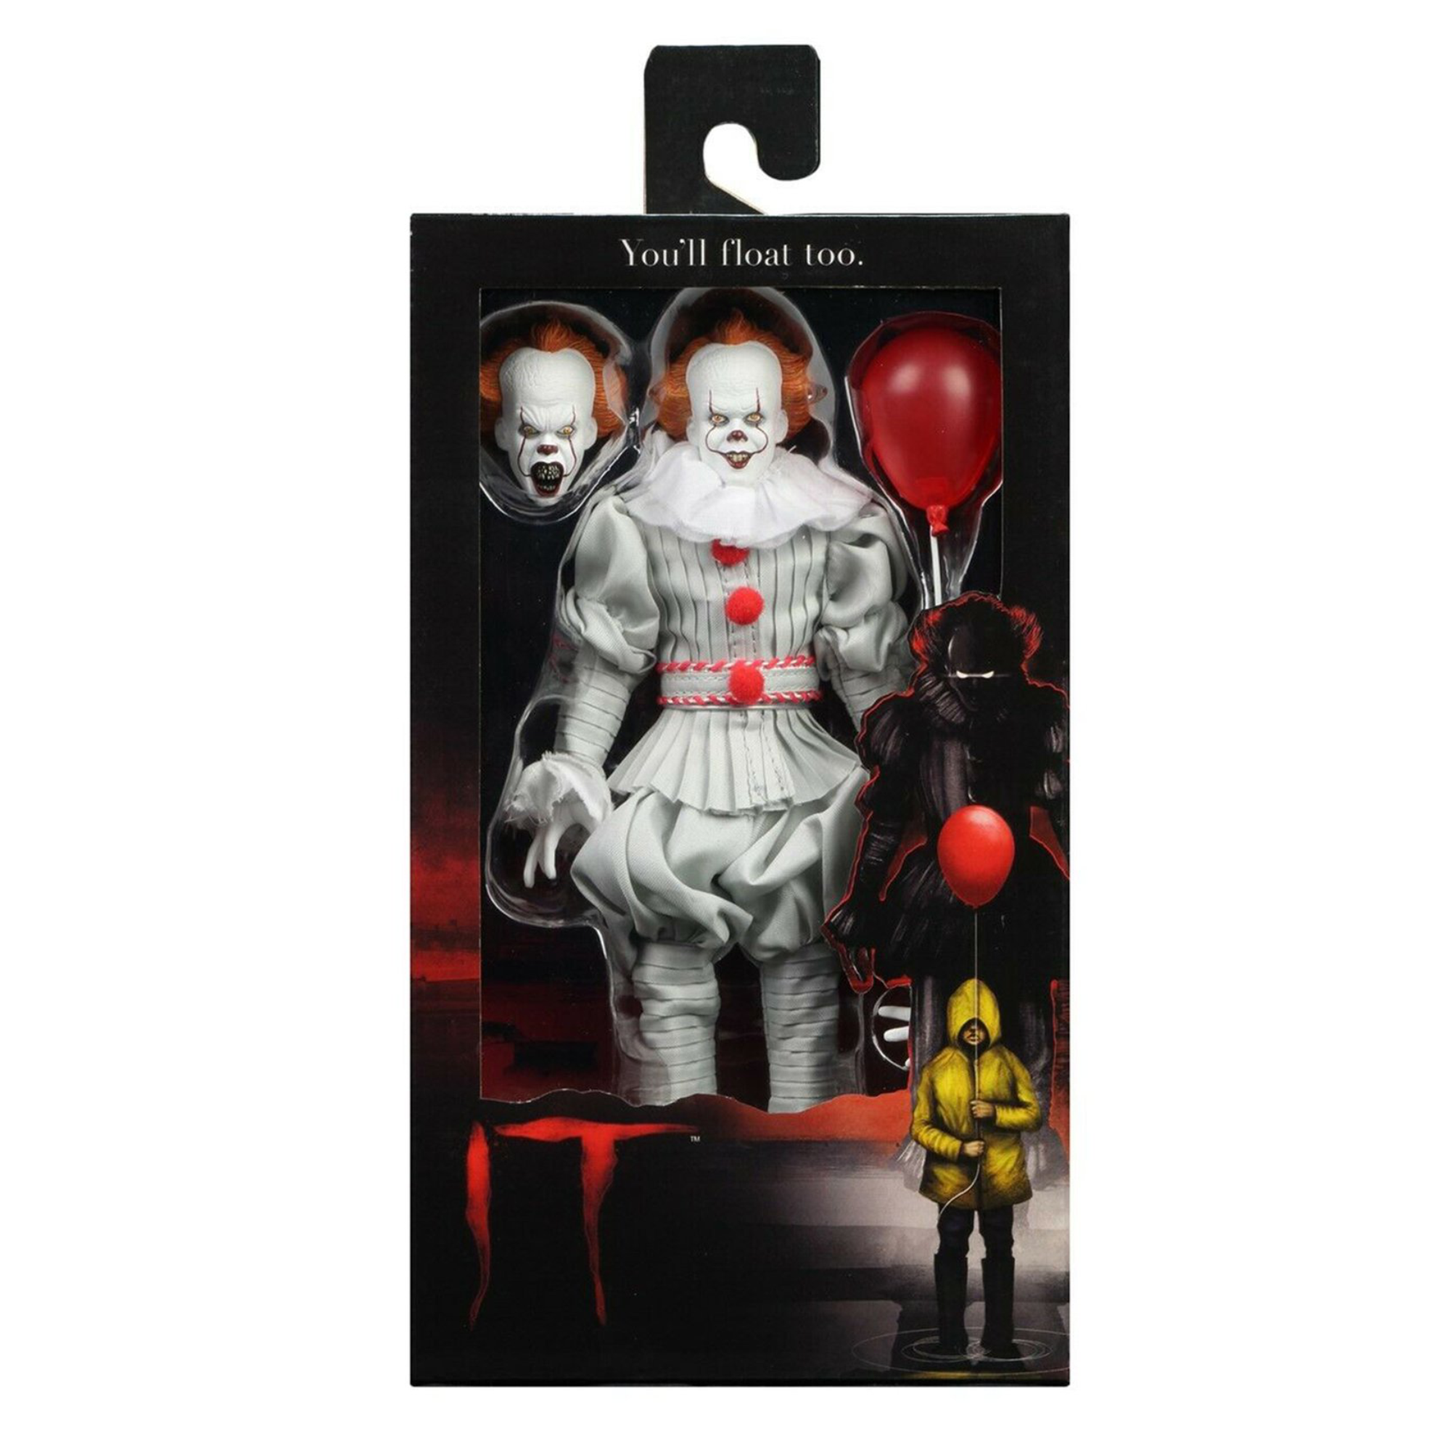 IT (2017) - Pennywise Clothed 8” Action Figure